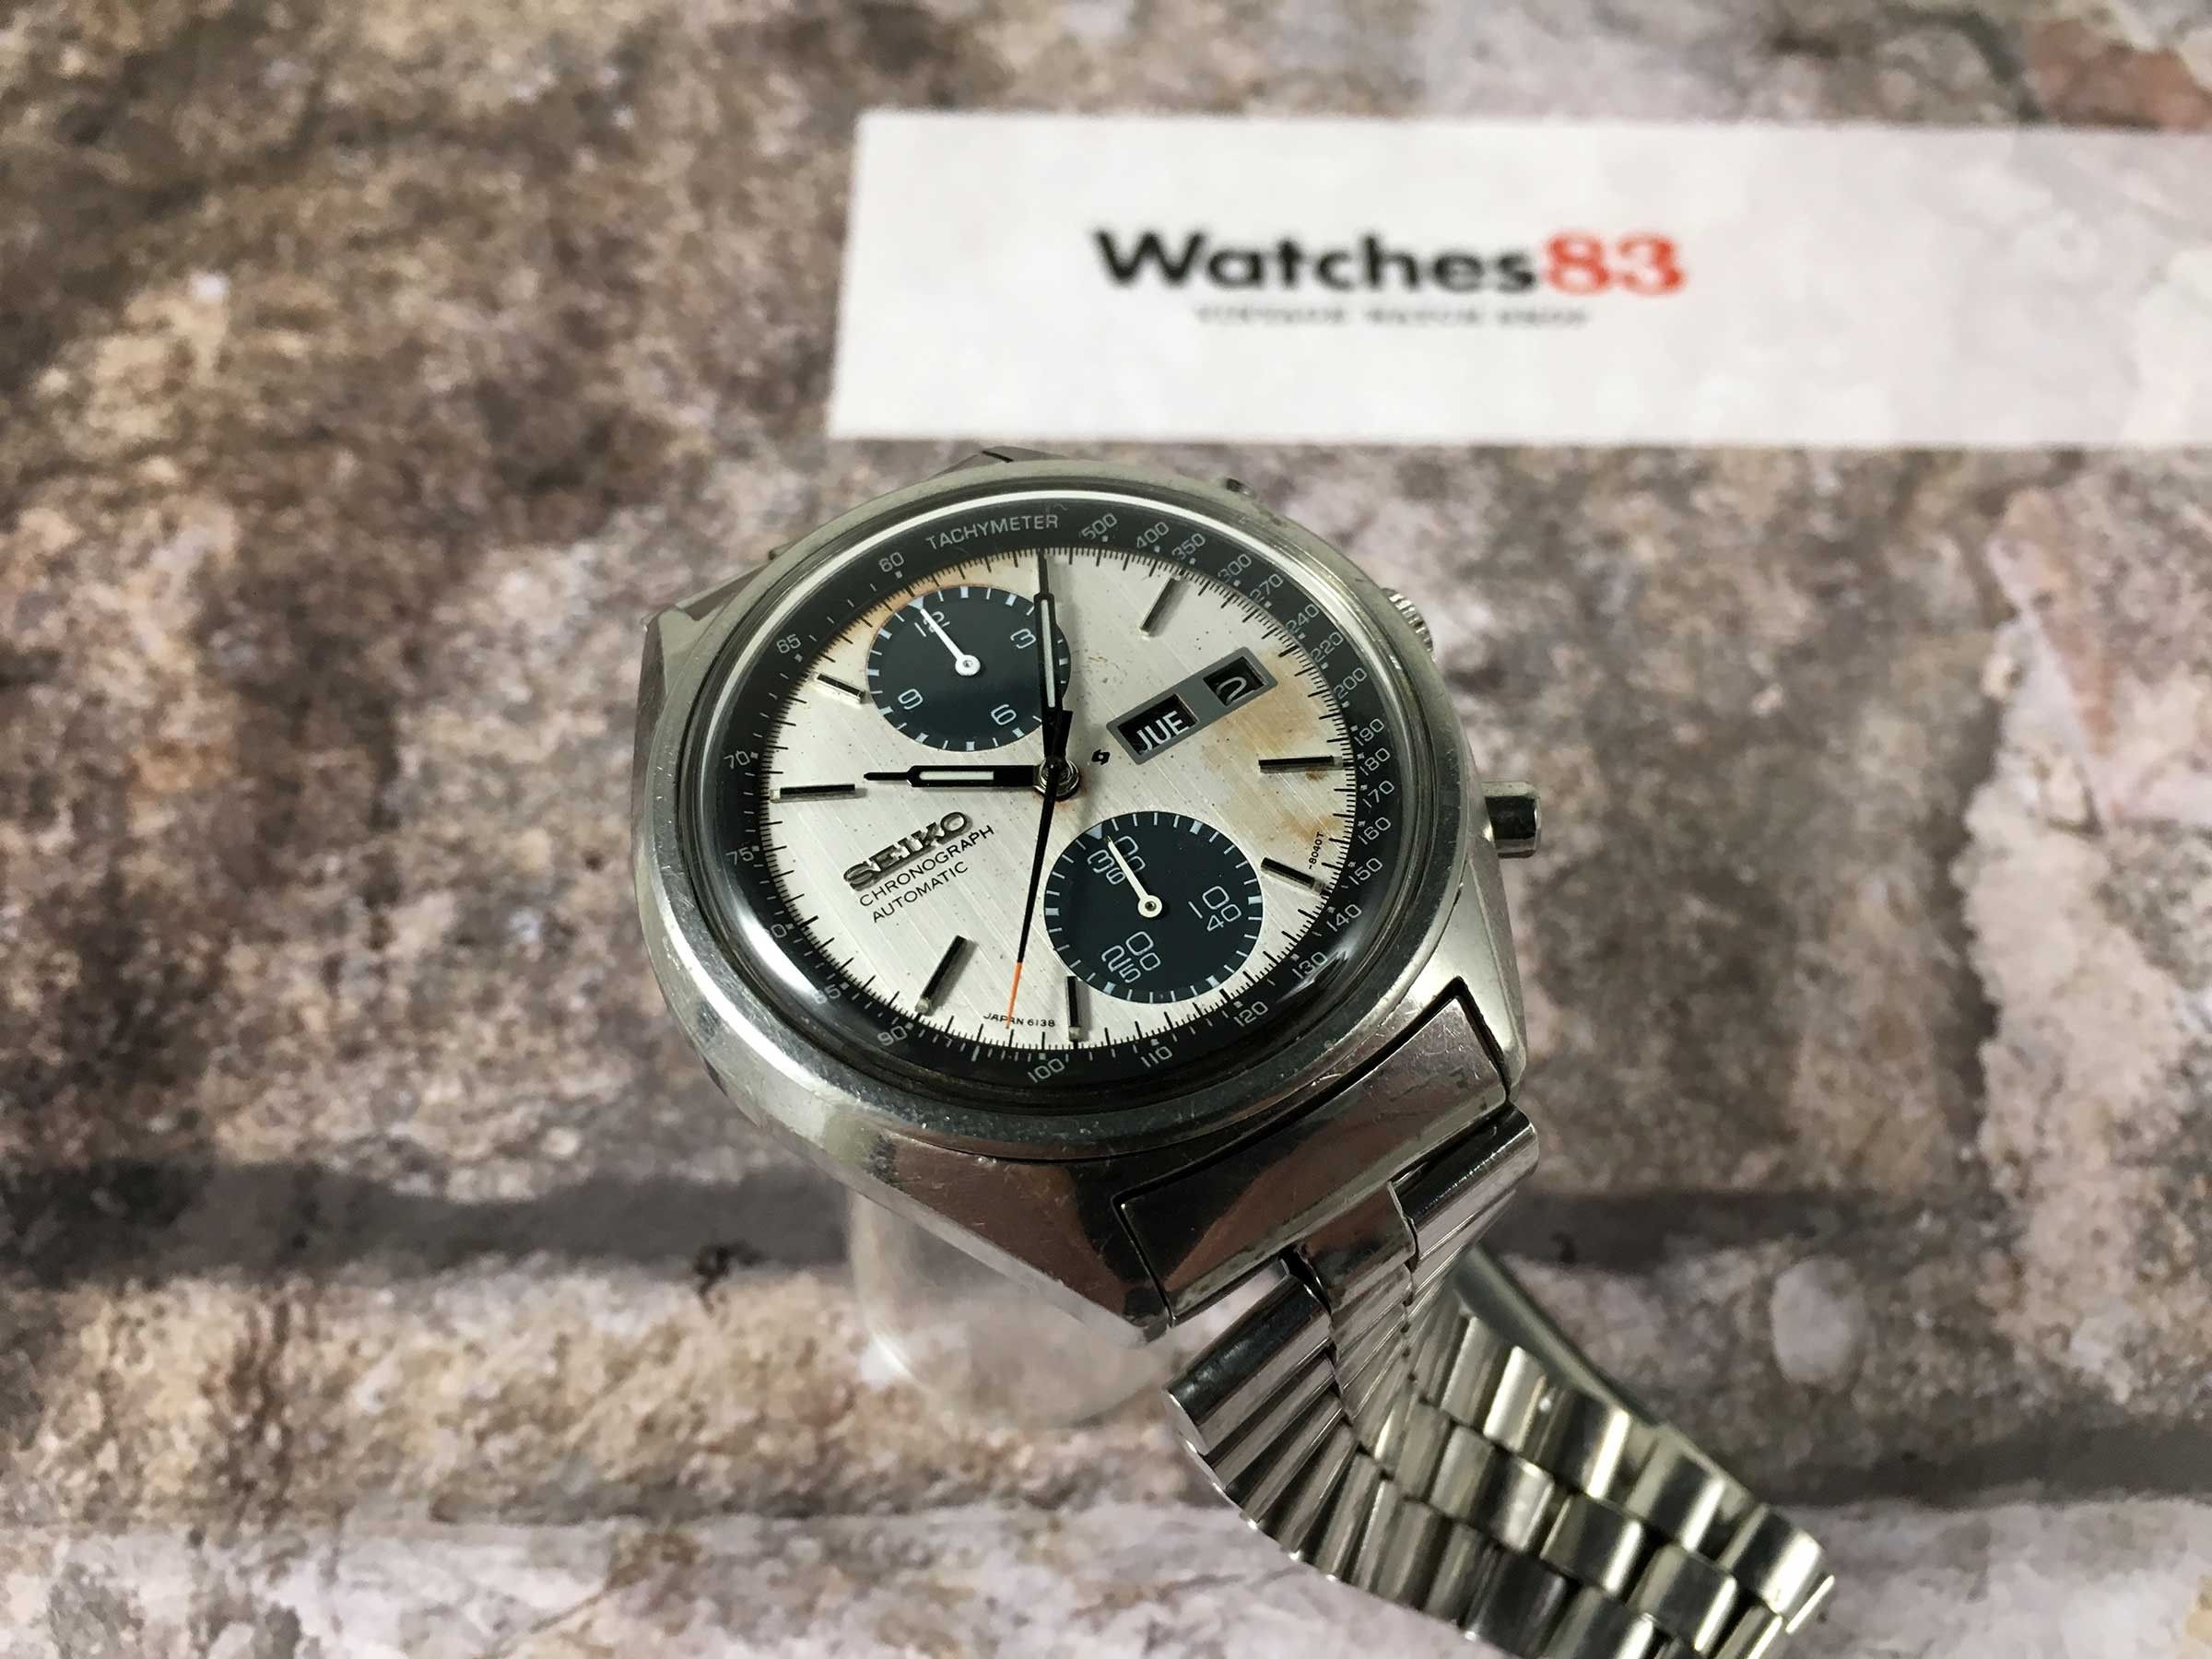 SEIKO PANDA Vintage automatic chronograph watch Ref. 6138-8020 Cal. 6138-B  PATINA DIAL *** SPECTACULAR *** Seiko Vintage watches - Watches83